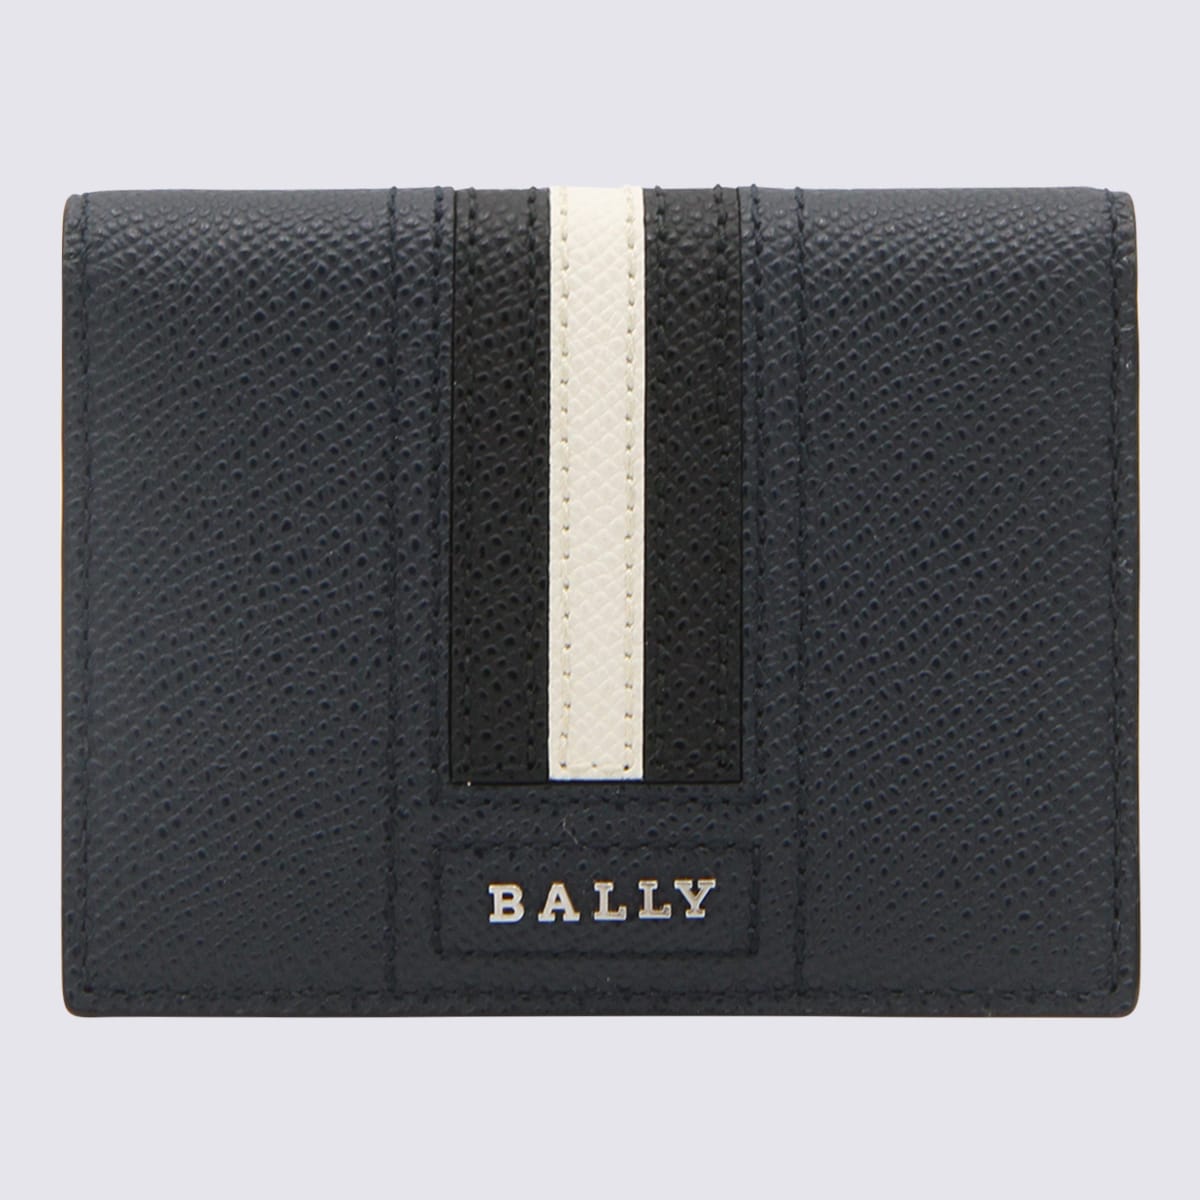 Navy Blue, White And Black Leather Wallet